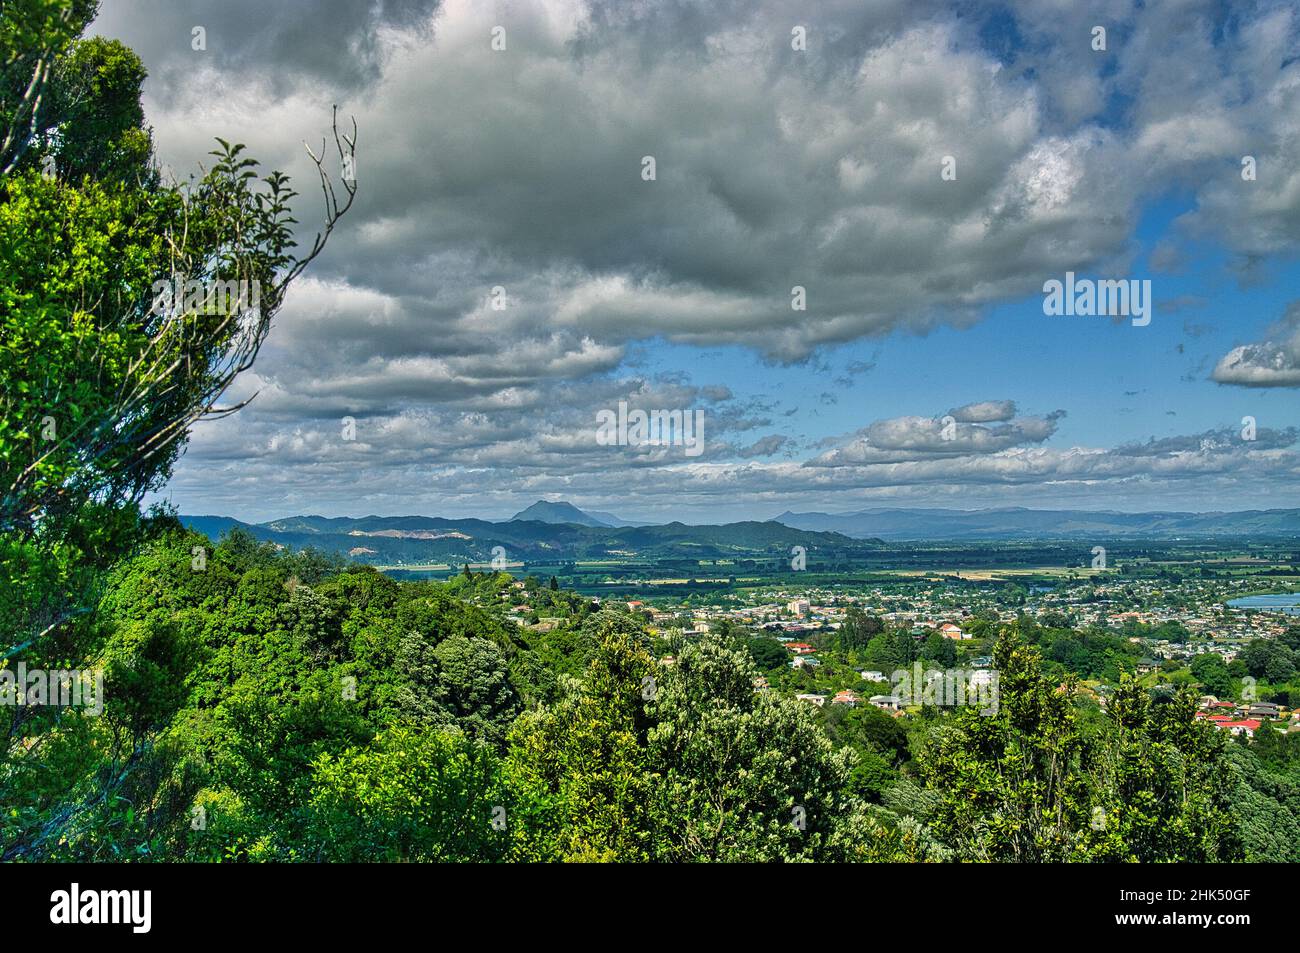 View of the town of Whakatane on the Bay of Plenty, North Island, New Zealand, with high hills and a volcano in the background Stock Photo